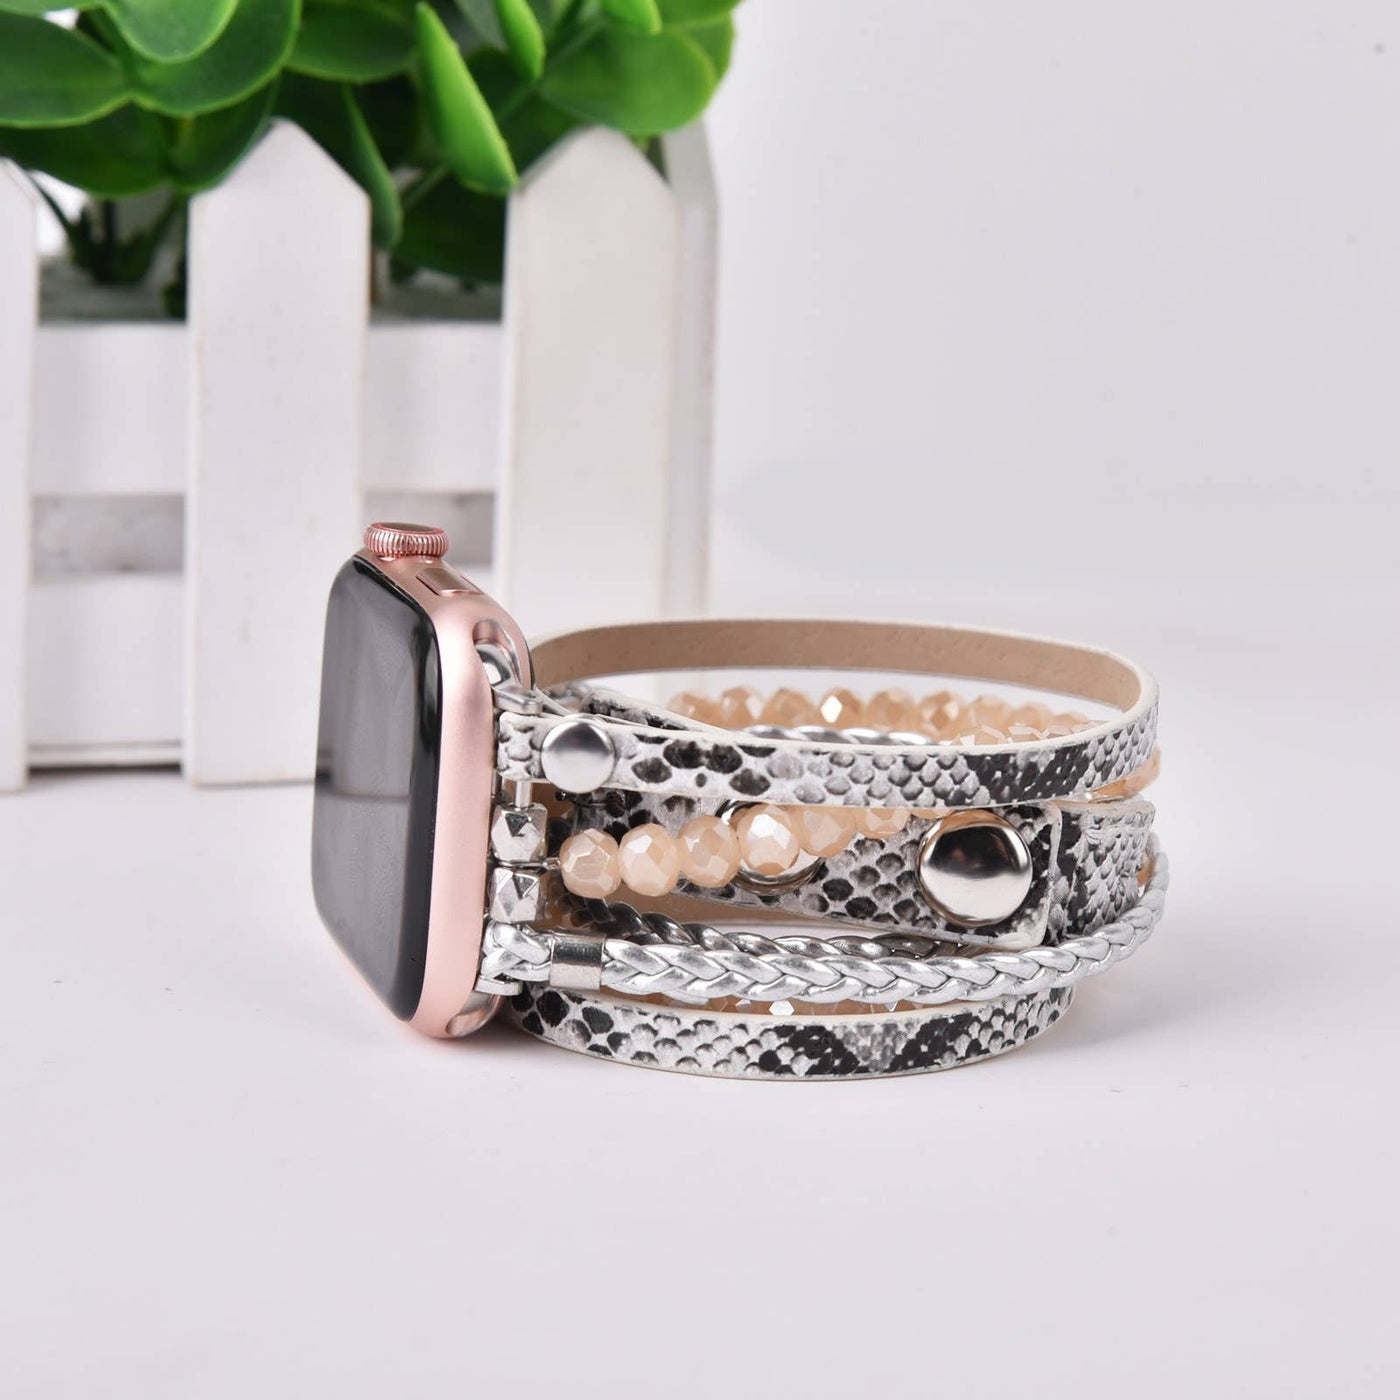 Braided Leather Band Apple Watch Wrap